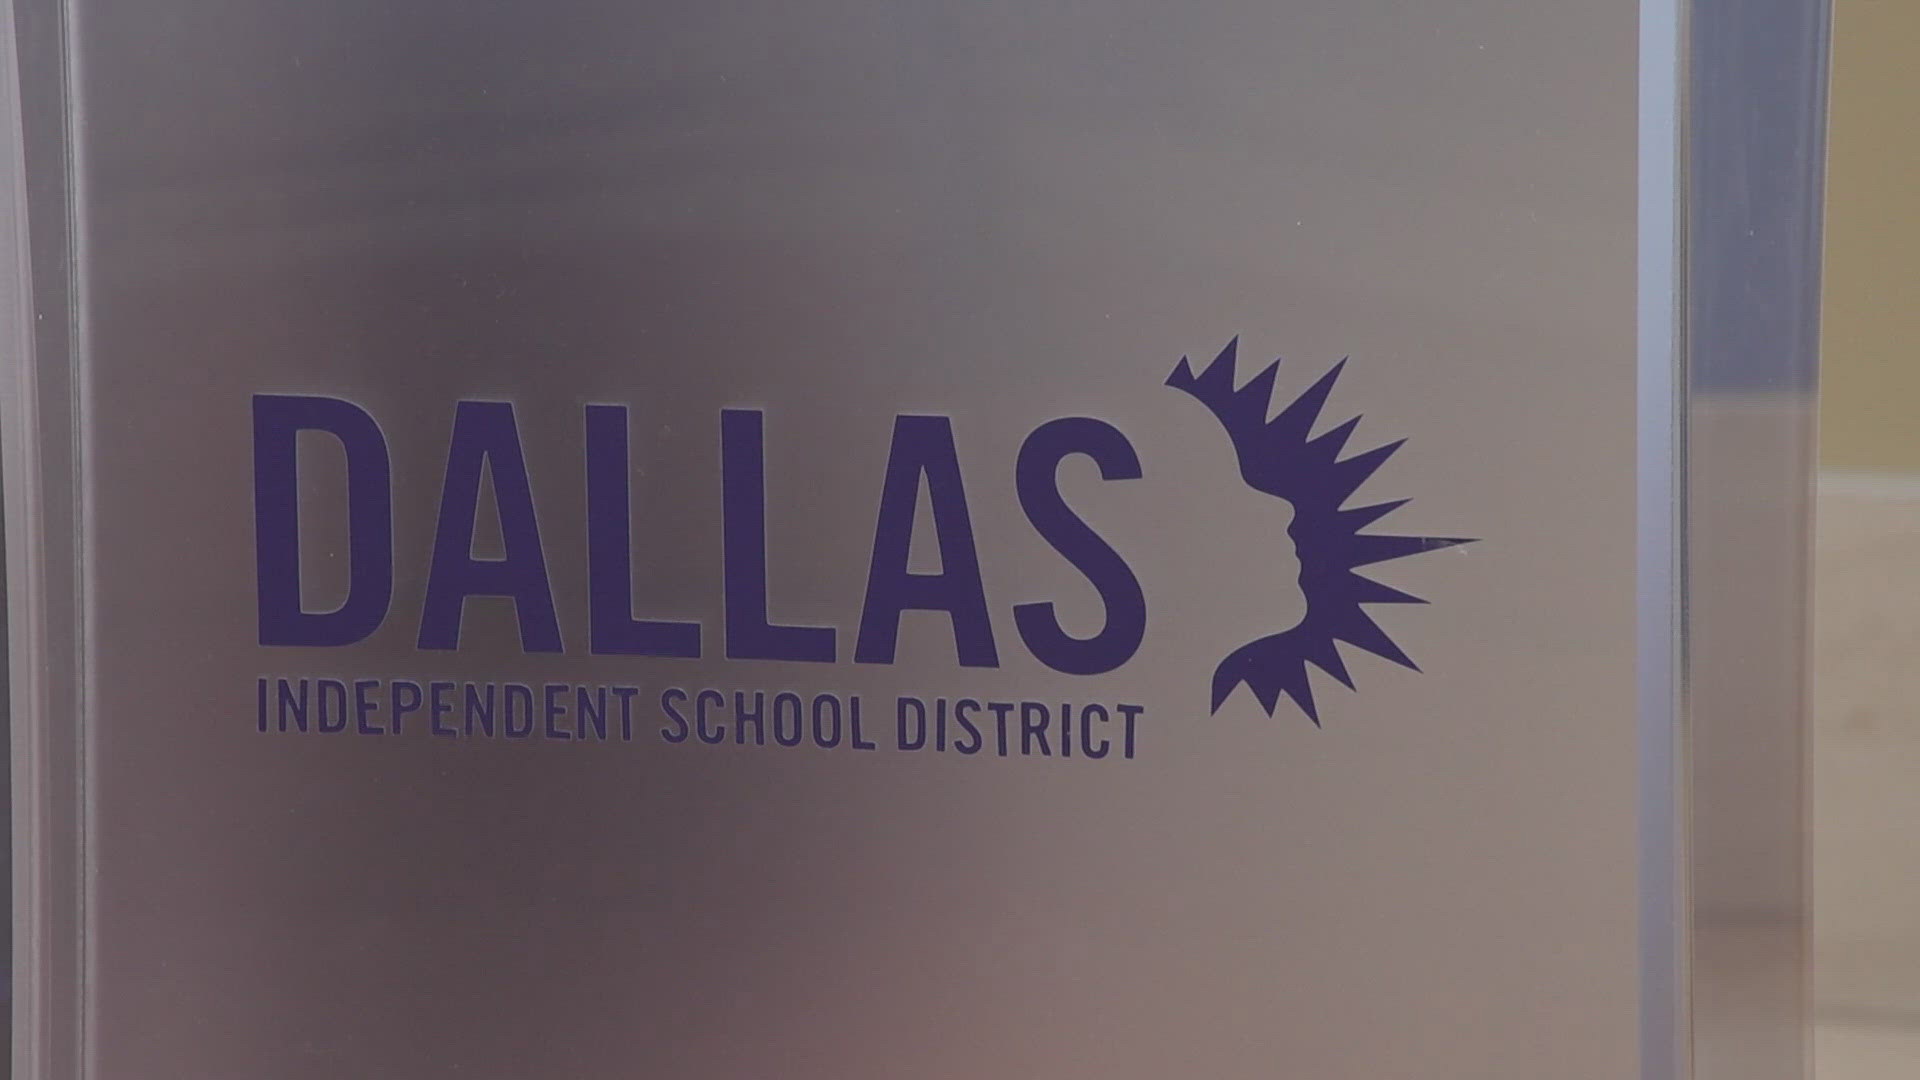 The district said in a news release that the shooting at Wilmer-Hutchins High School earlier this month "has shown us areas where we must improve."